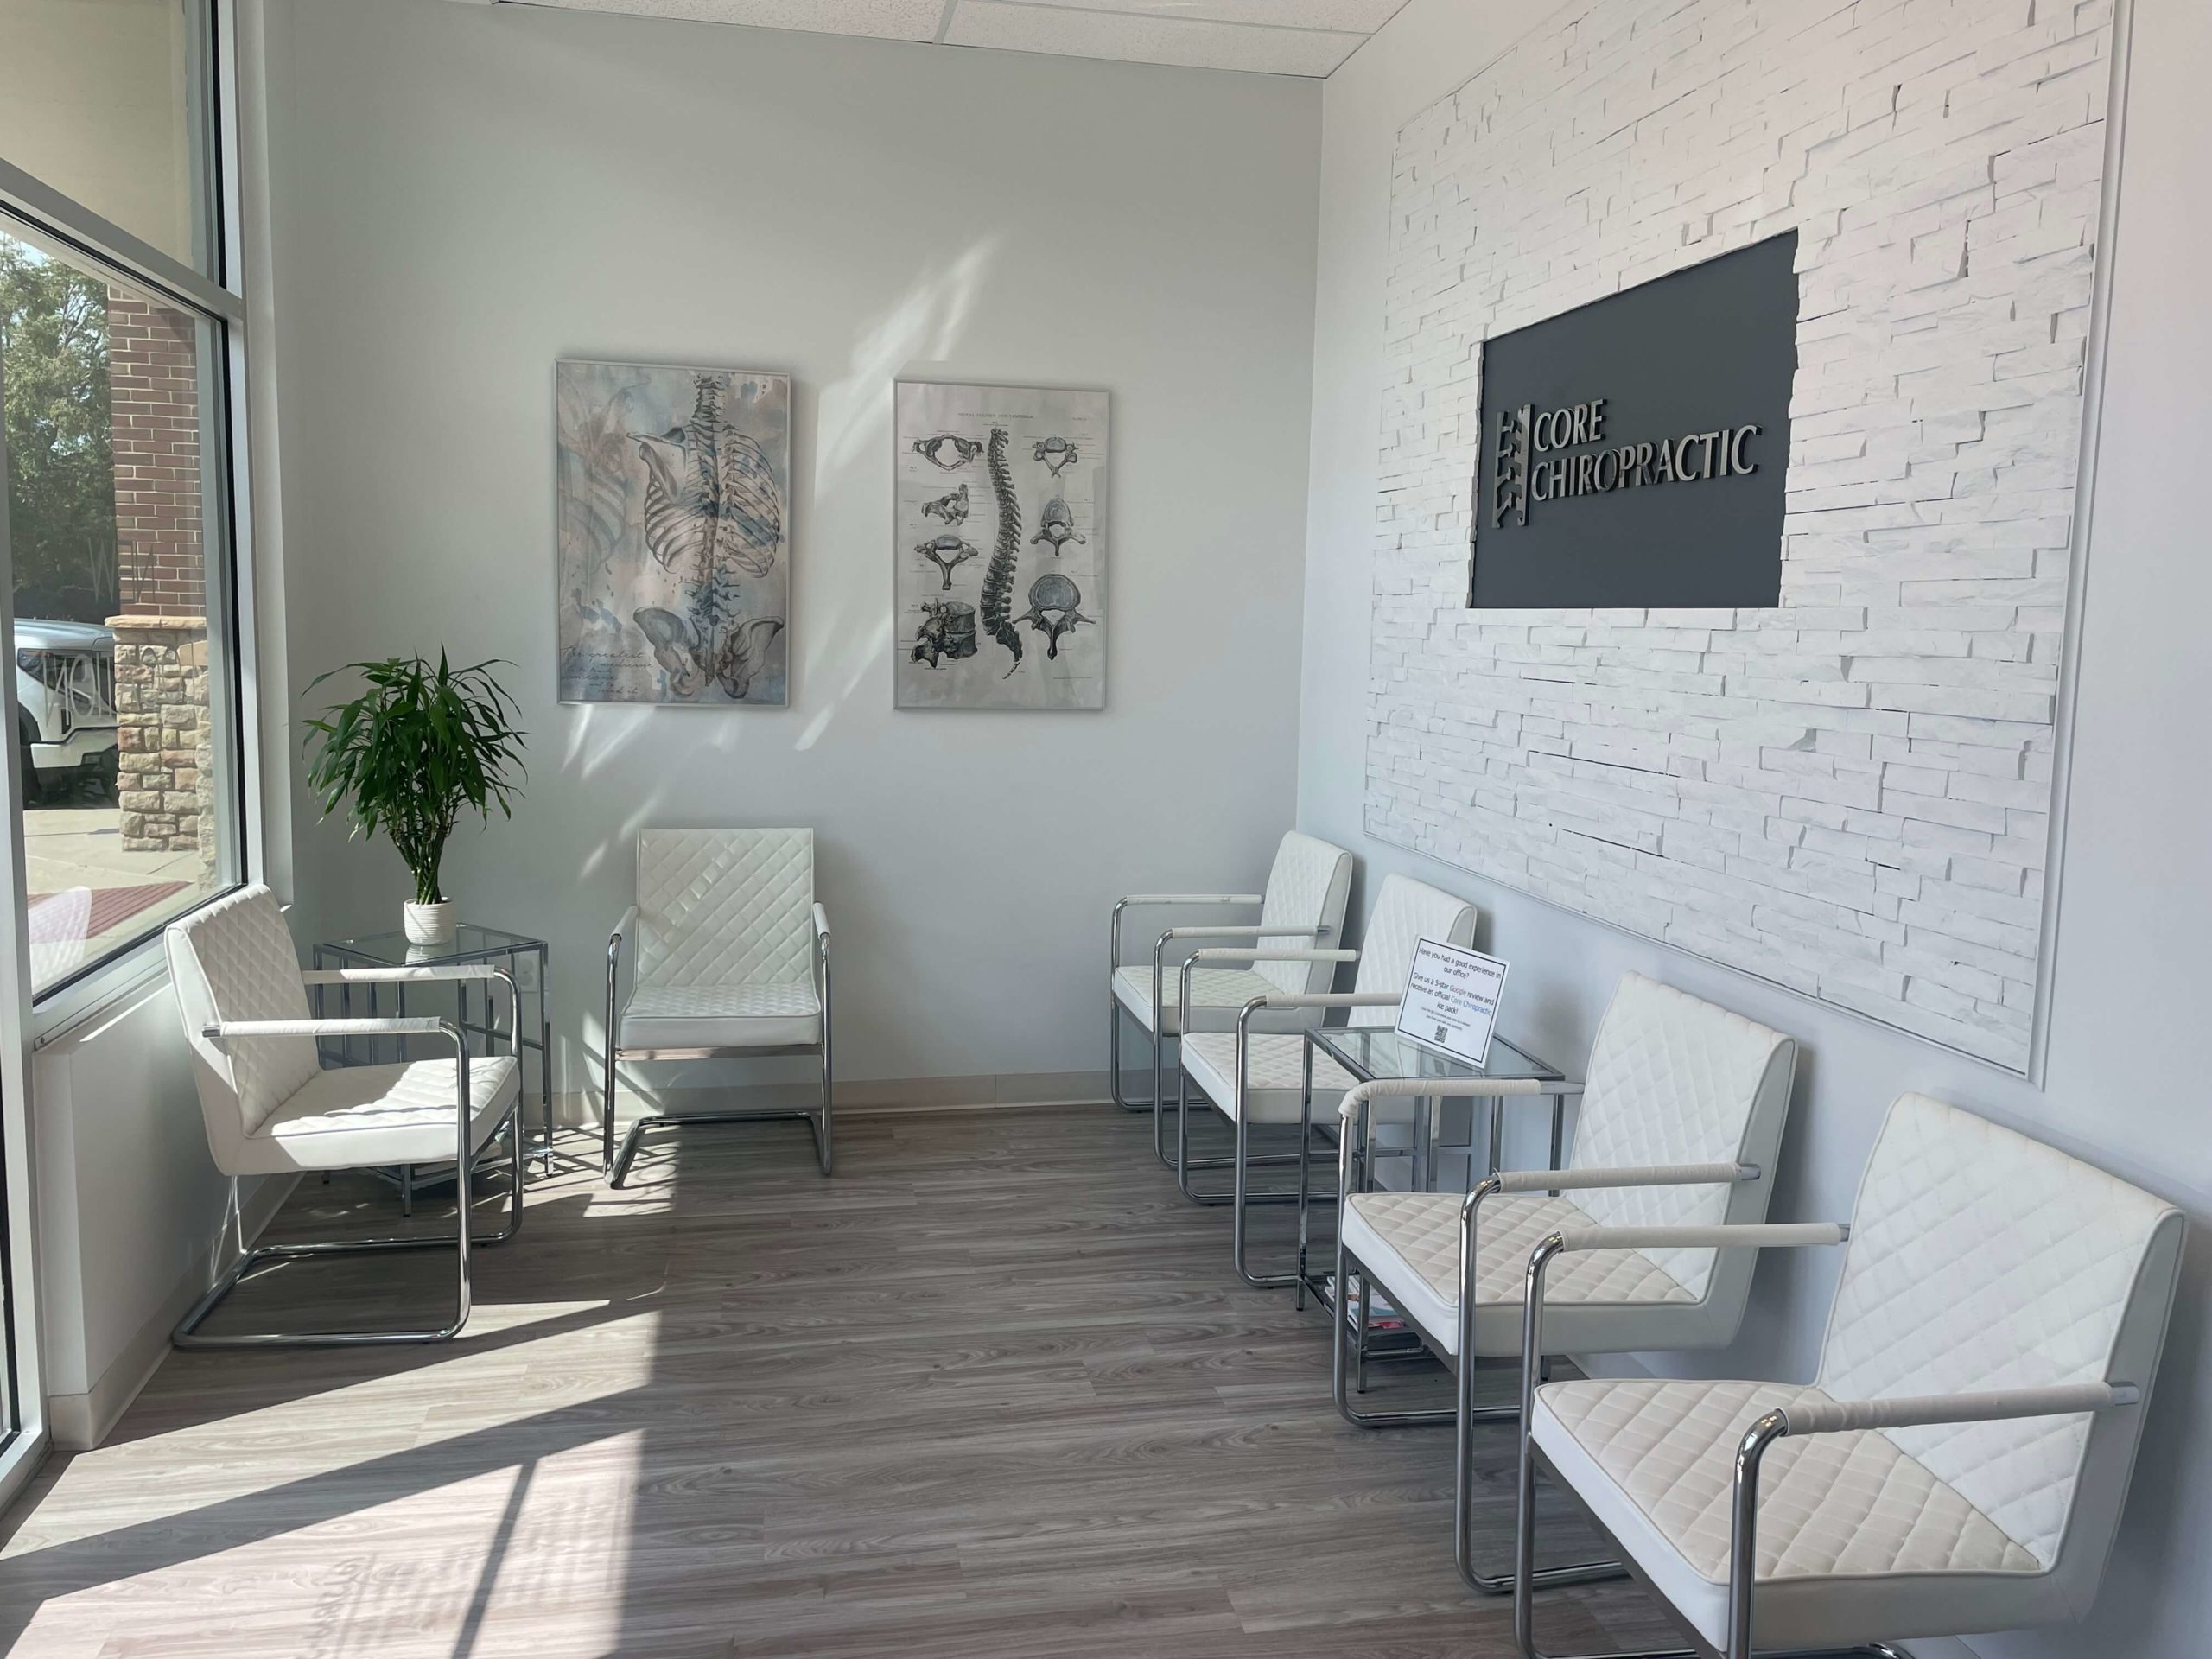 Front Lobby, welcome to Core Chiropractic